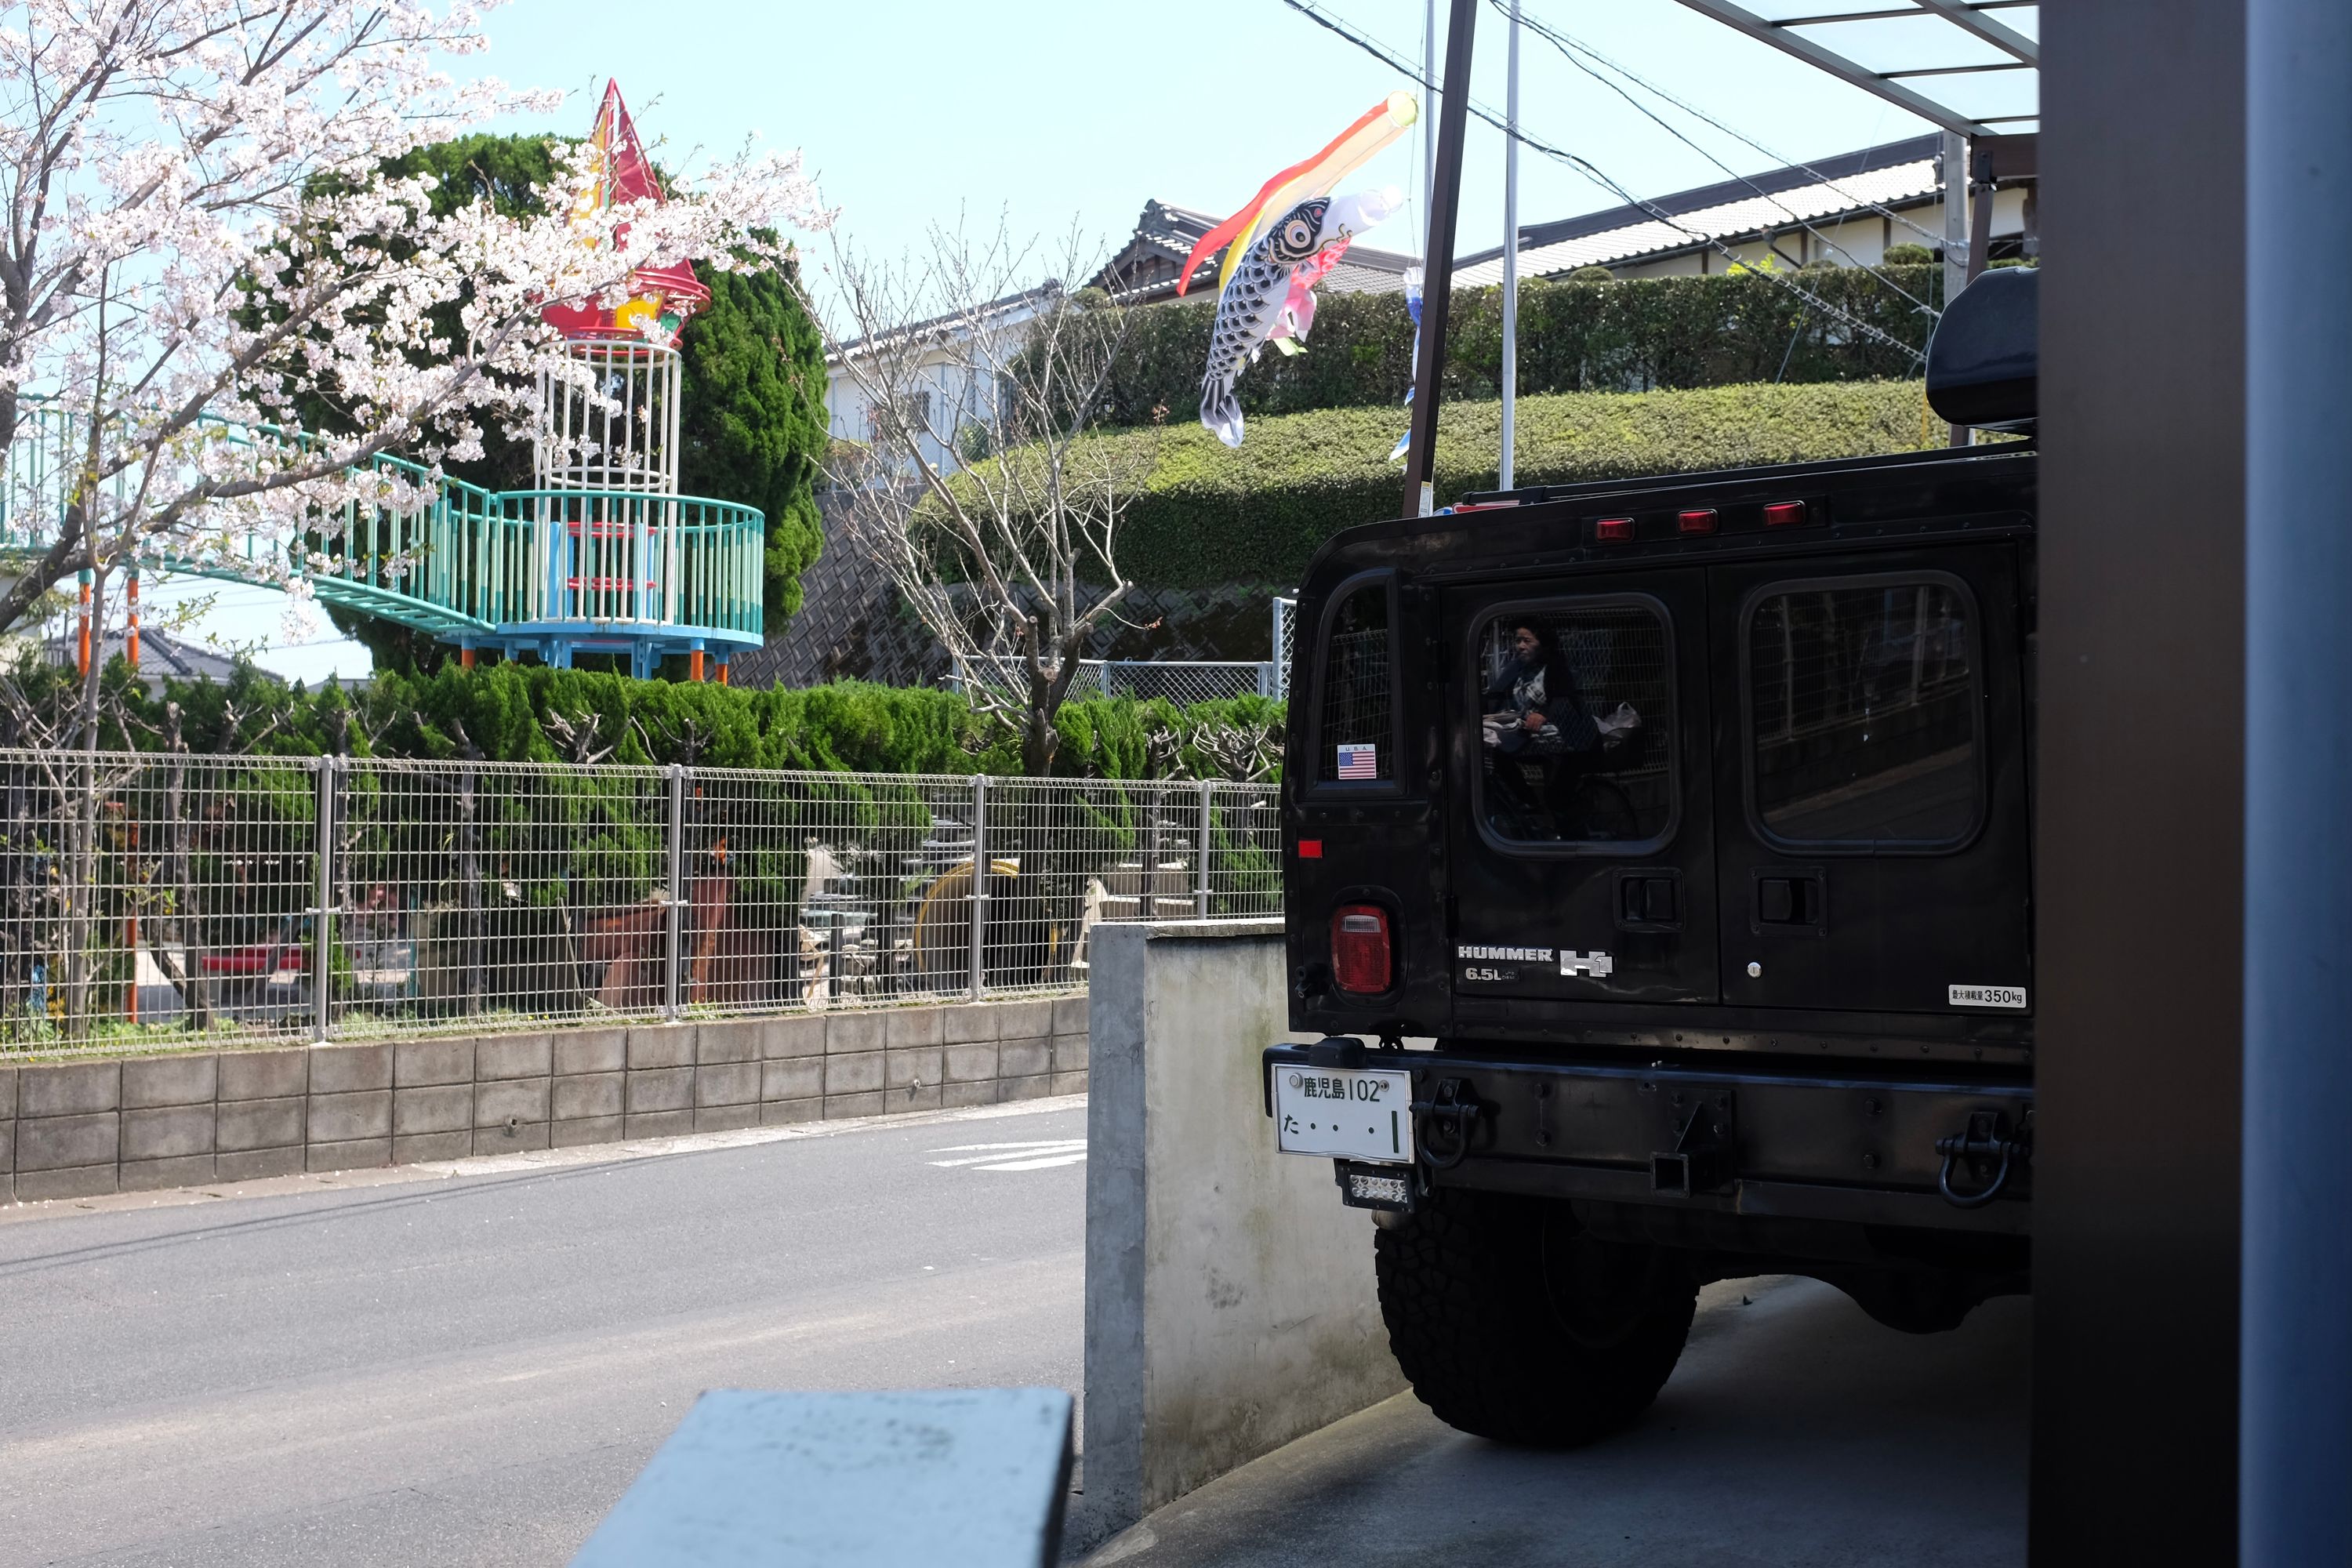 A Hummer H1 parked in a tight spot.